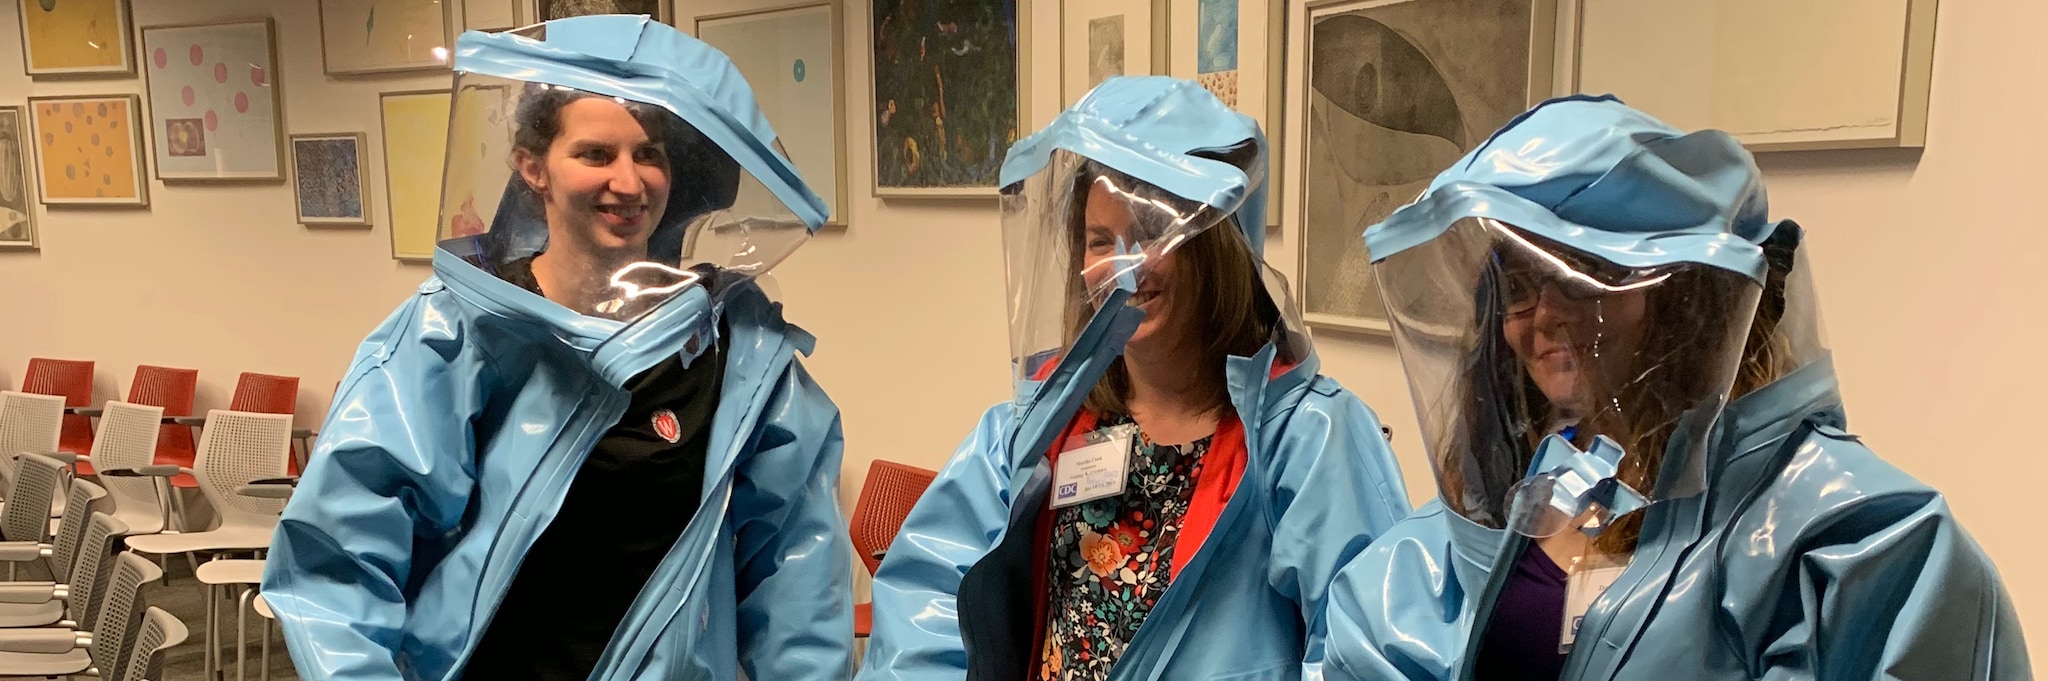 EEP Students try on biosafety suits during a tour of the CDC Museum